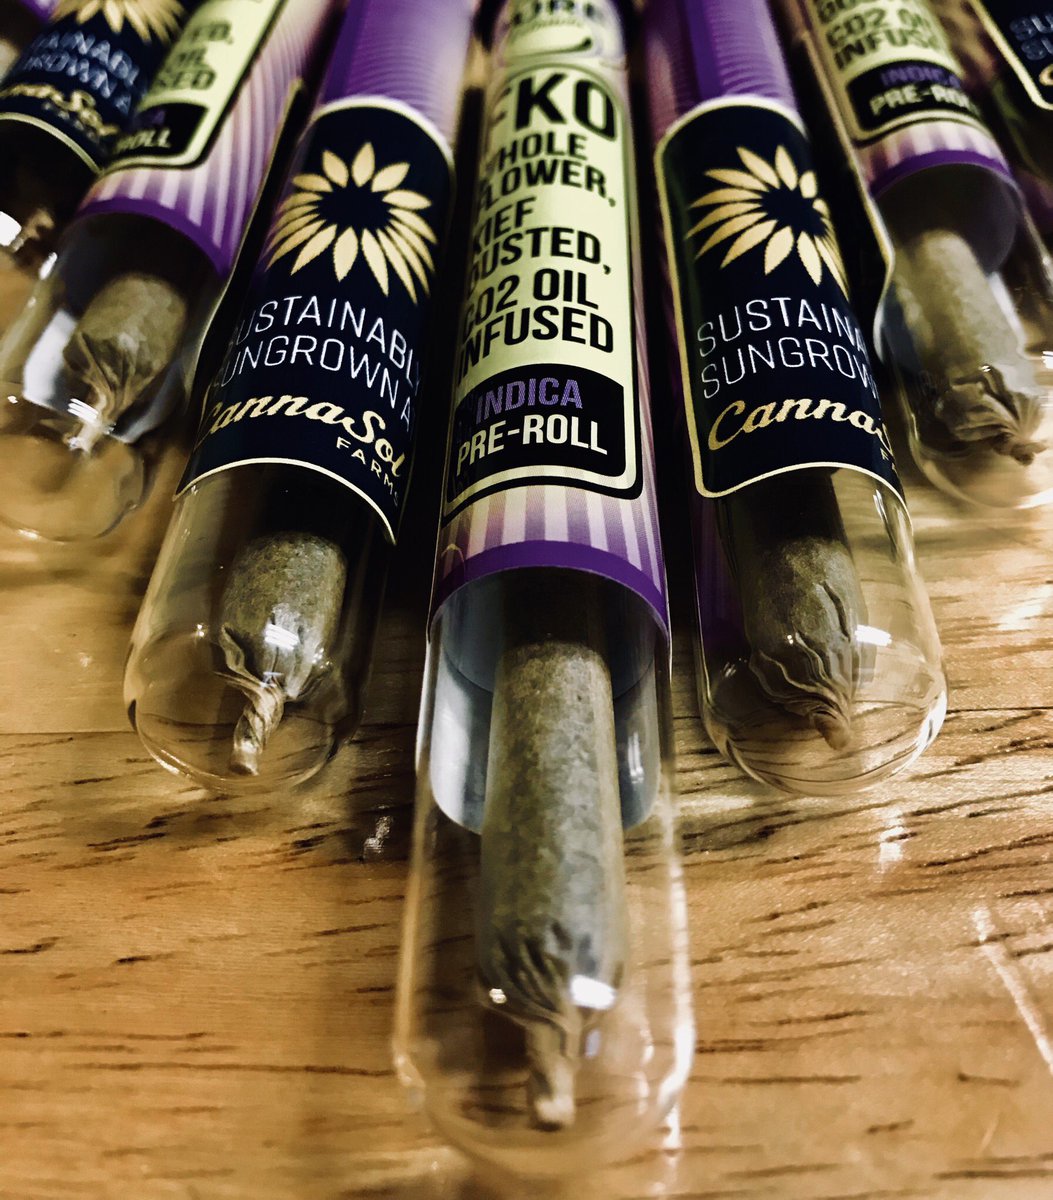 I get through Tuesdays with a little help from my friends.
21+
<
<
<
<
#seattlepureextracts #seattle #pure #extracts #smoketoforget #oils #highaf #stoned #weedlife #trees #localbusiness #happy #cool #fko #joint #flower #kief #oil #dabs #seattlestoners